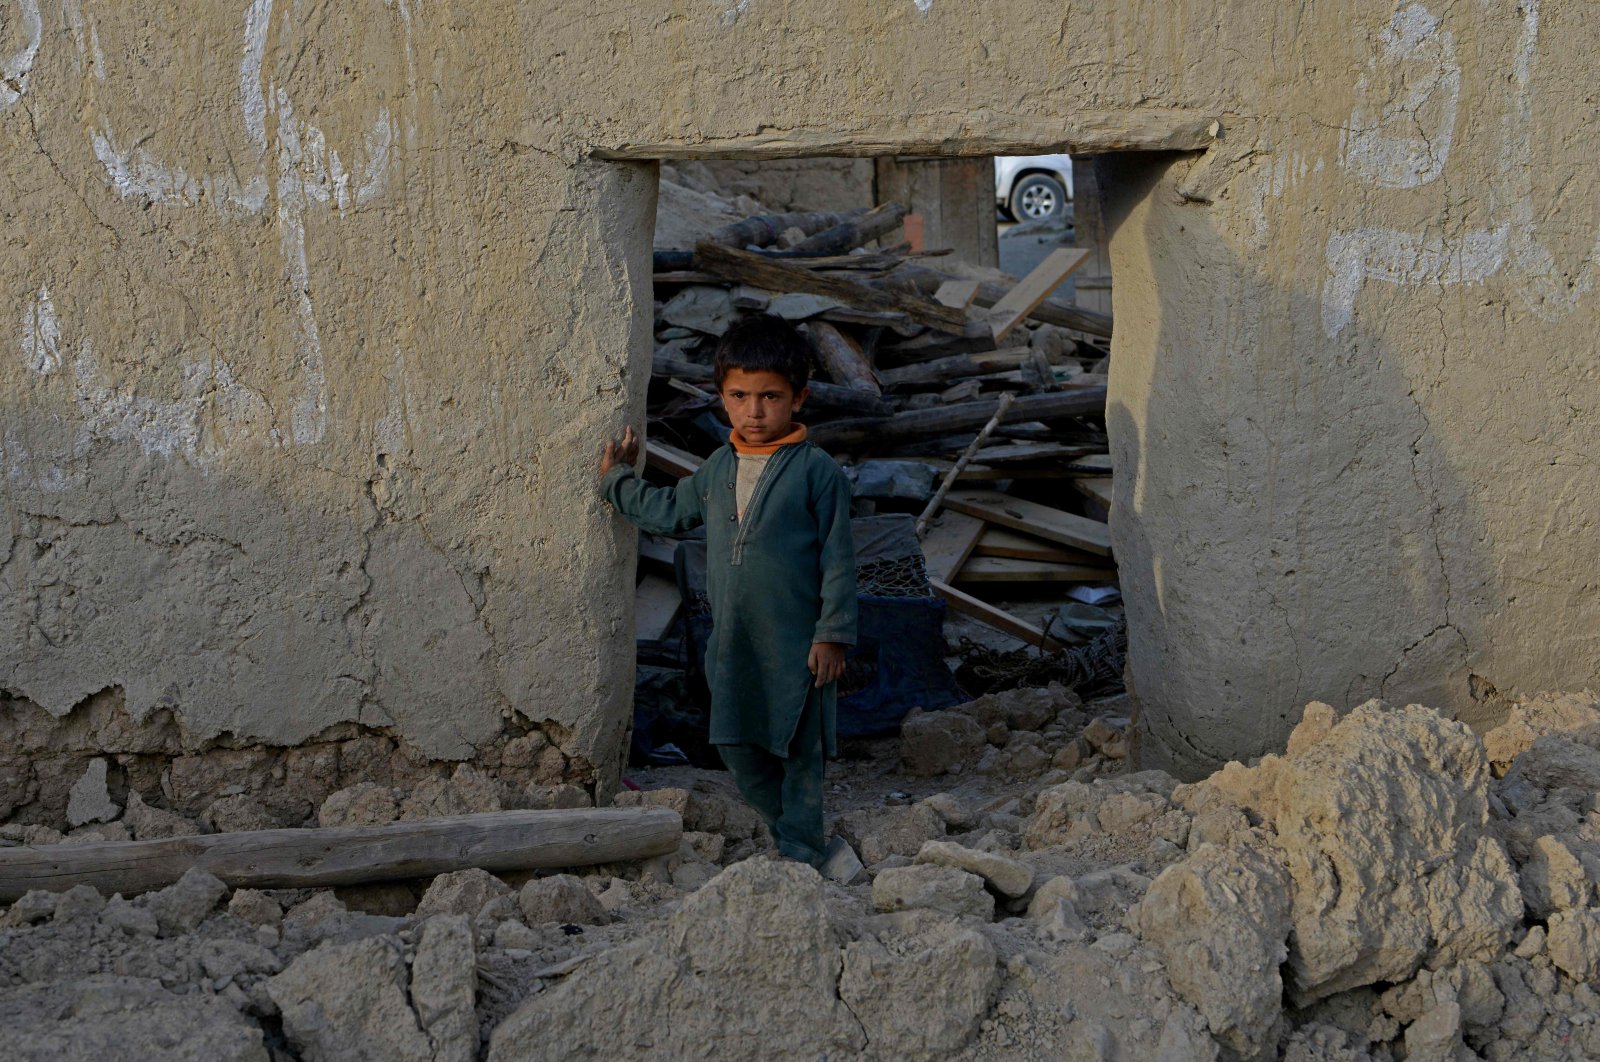 A boy stands inside a damaged house after a recent earthquake at Akhtar Jan village in Gayan district of Paktika province, Afghanistan, June 25, 2022. (AFP Photo)